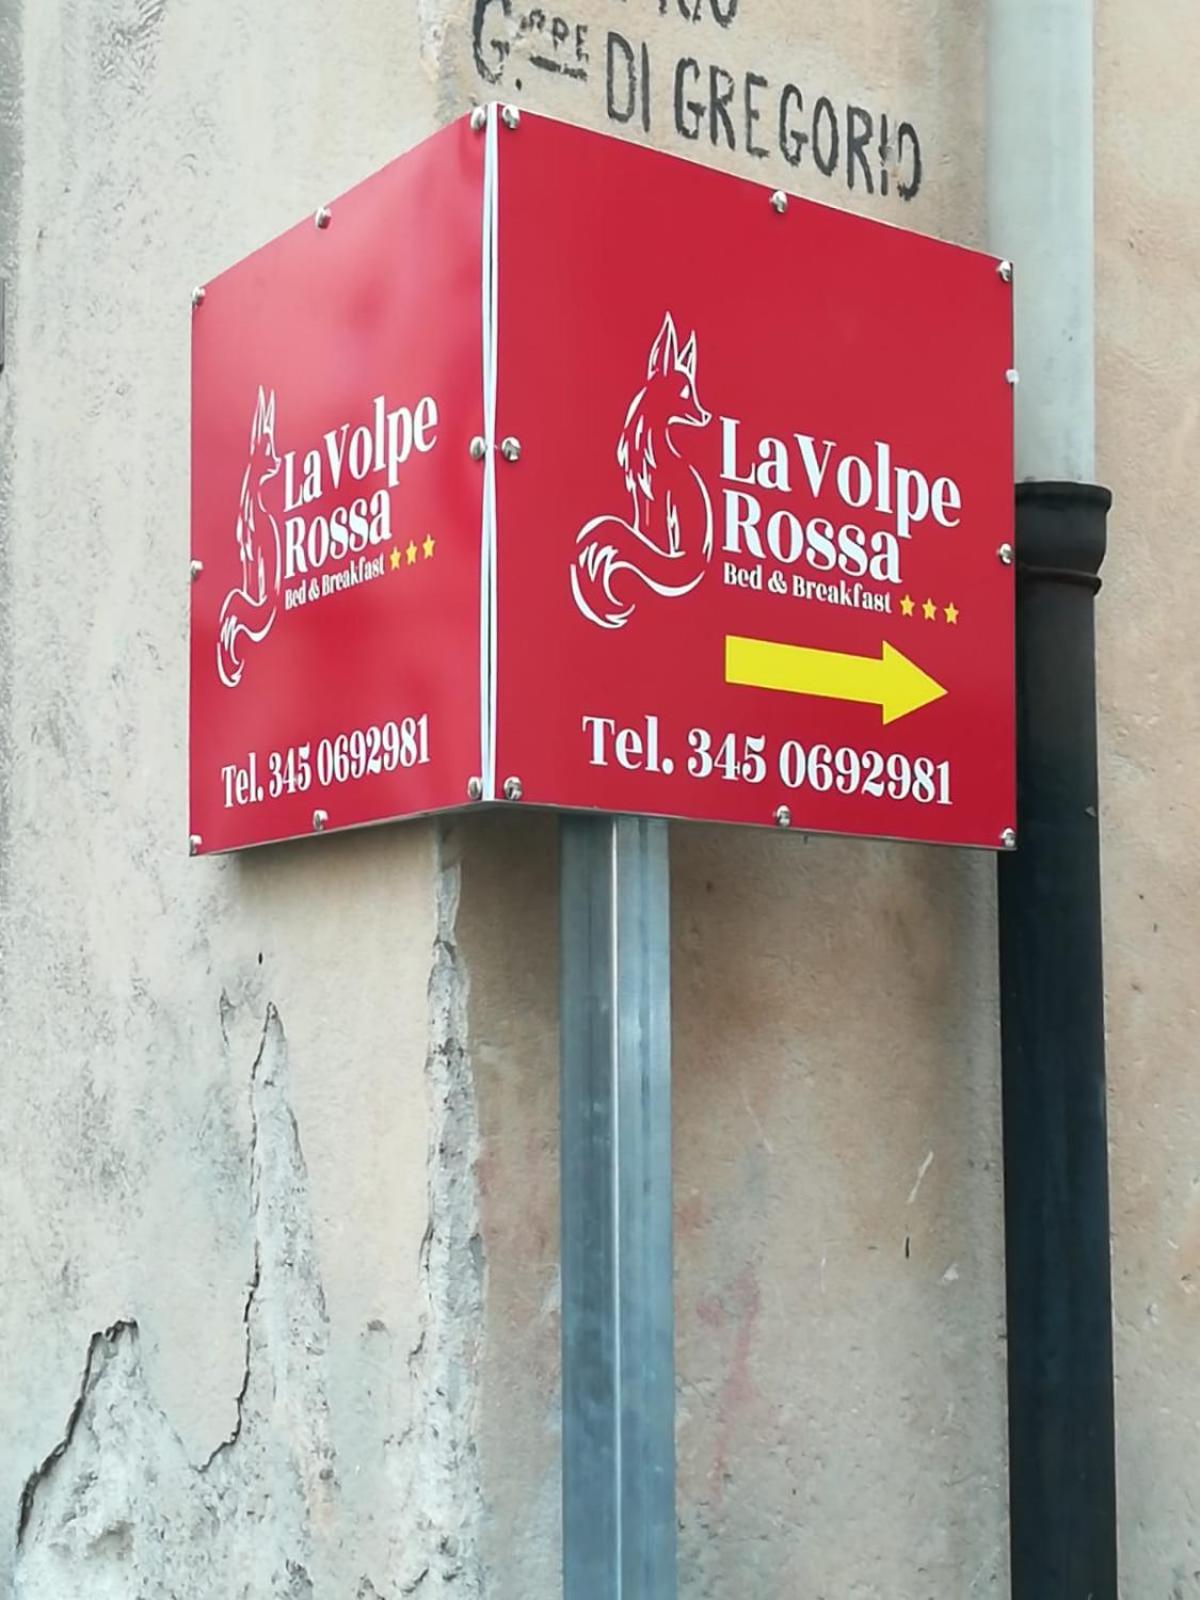 Bed And Breakfast La Volpe Rossa